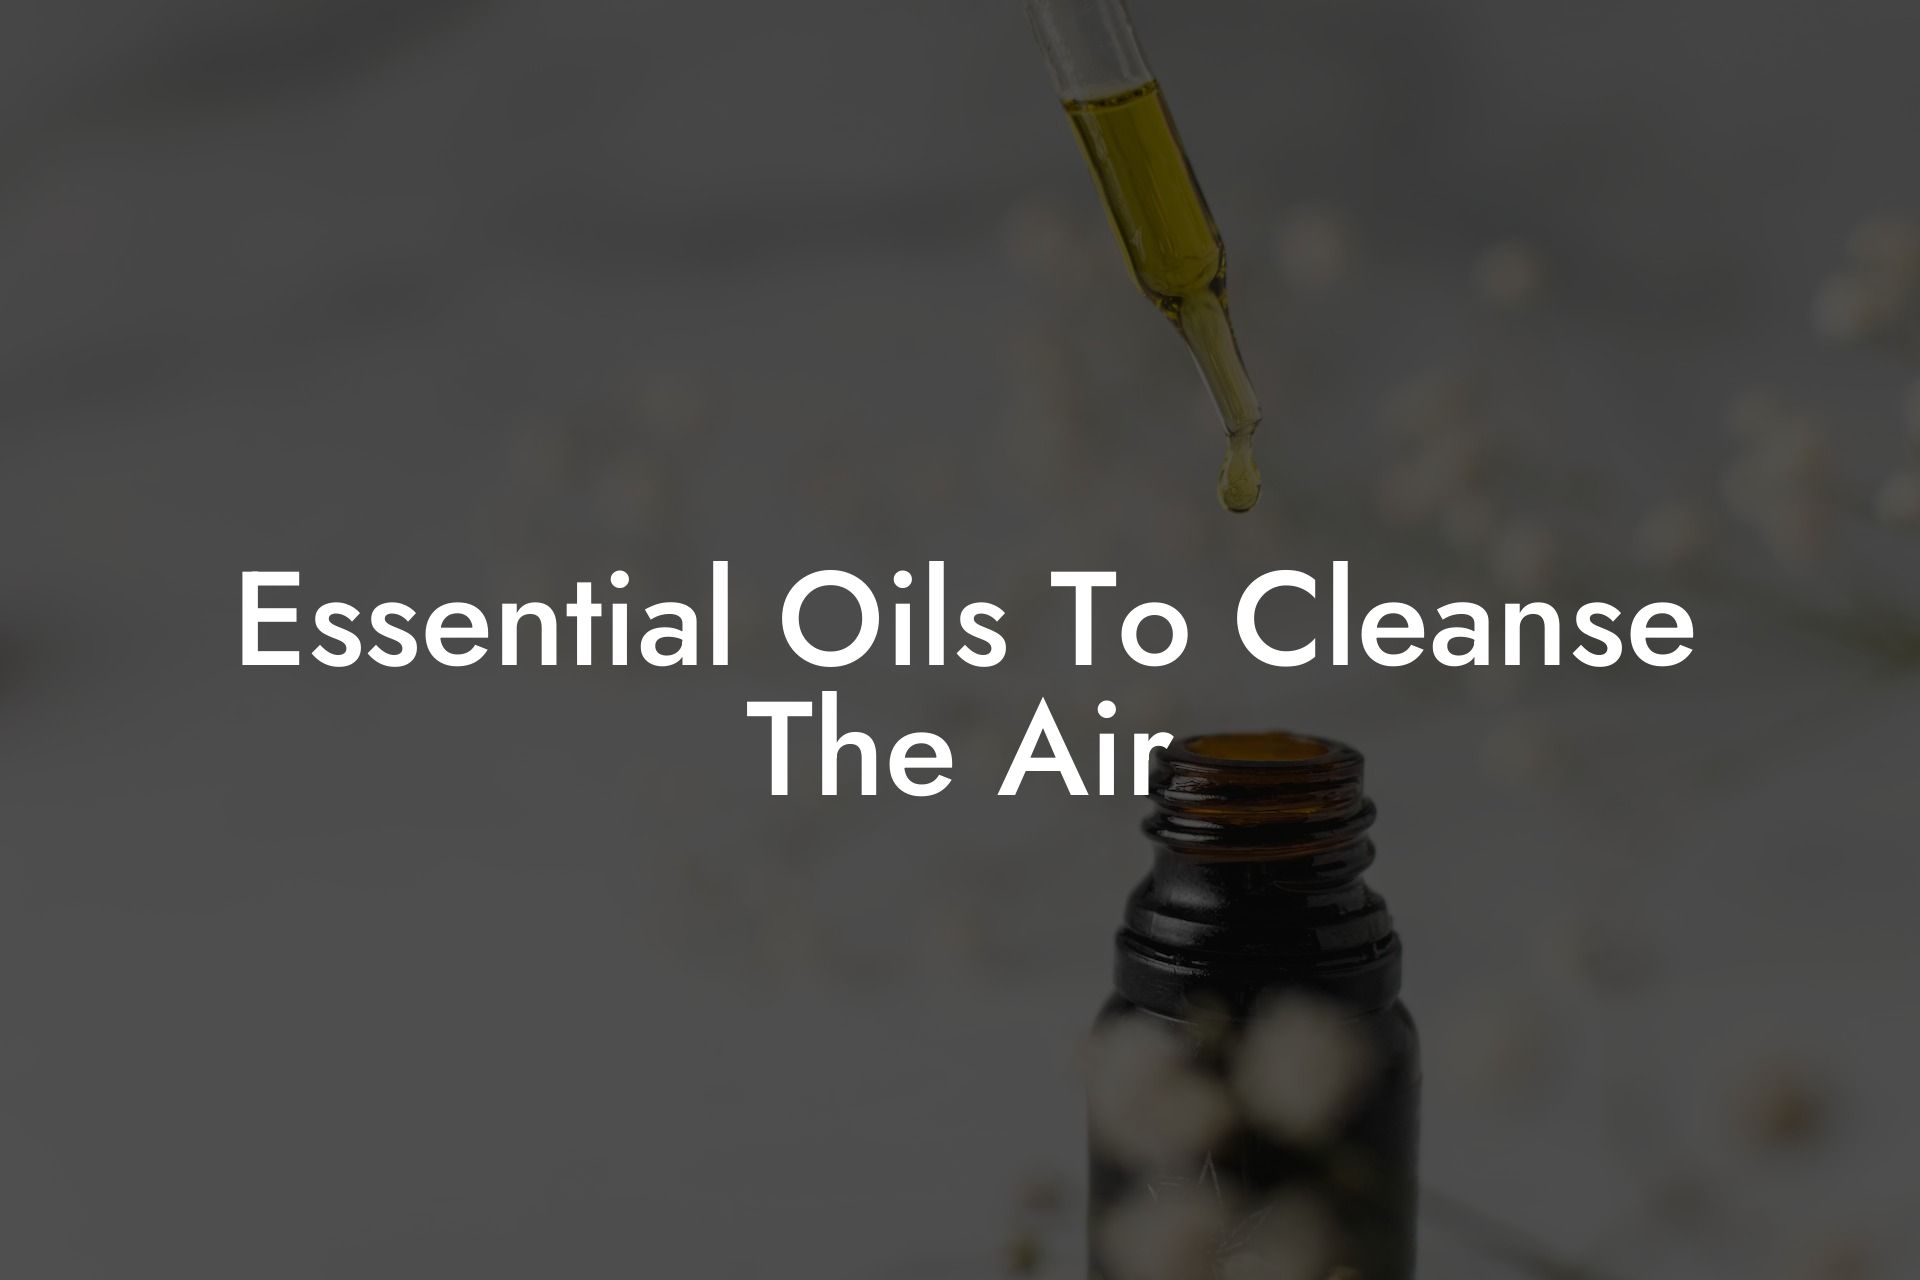 Essential Oils To Cleanse The Air